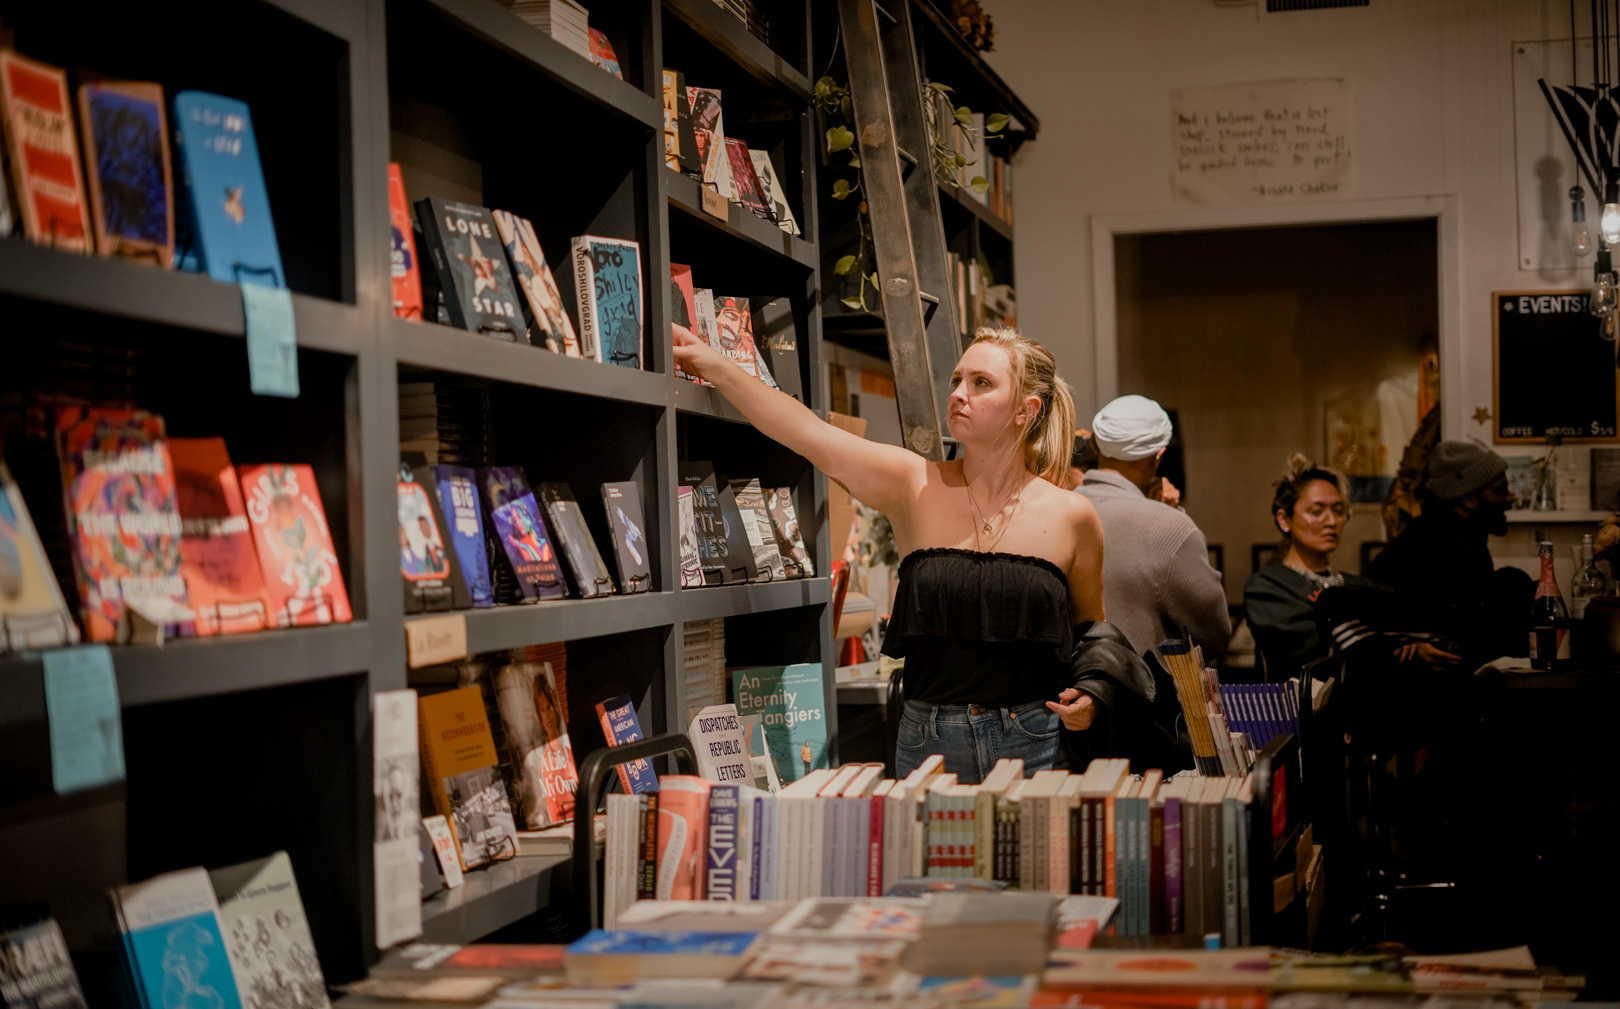 A person browses books on a shelf inside a book store